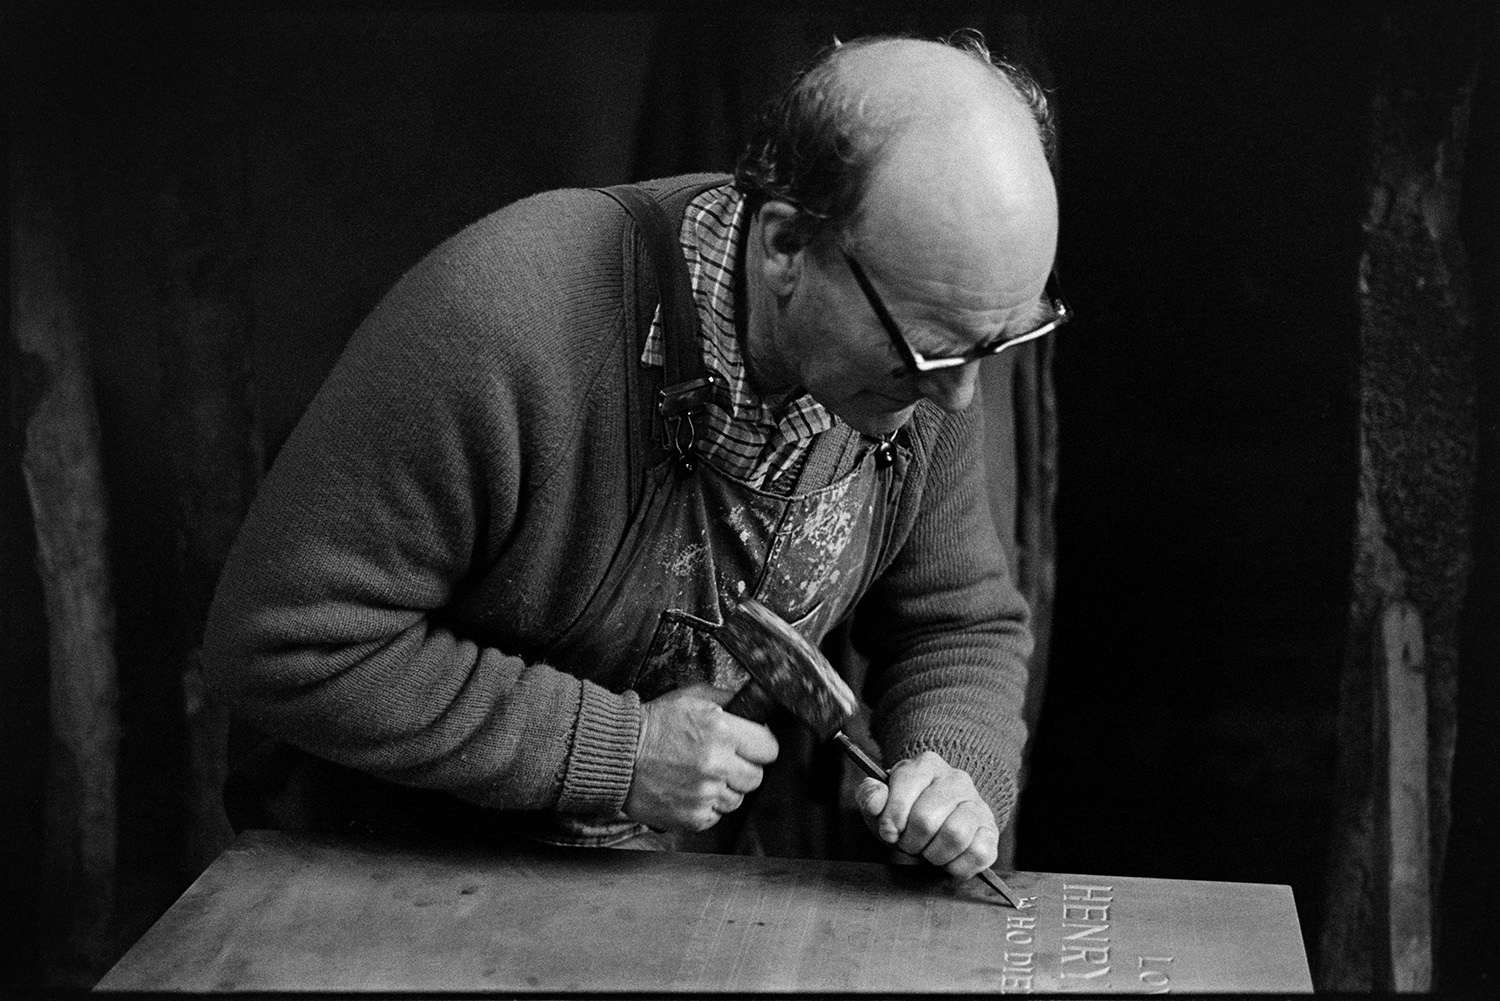 Monumental mason at work on headstone in workshop and loading stone into car. 
[Bruce Edyvean, a monumental mason, engraving a headstone for a grave in his workshop in New Street, Torrington. He is using a hammer and chisel to engrave the stone.]